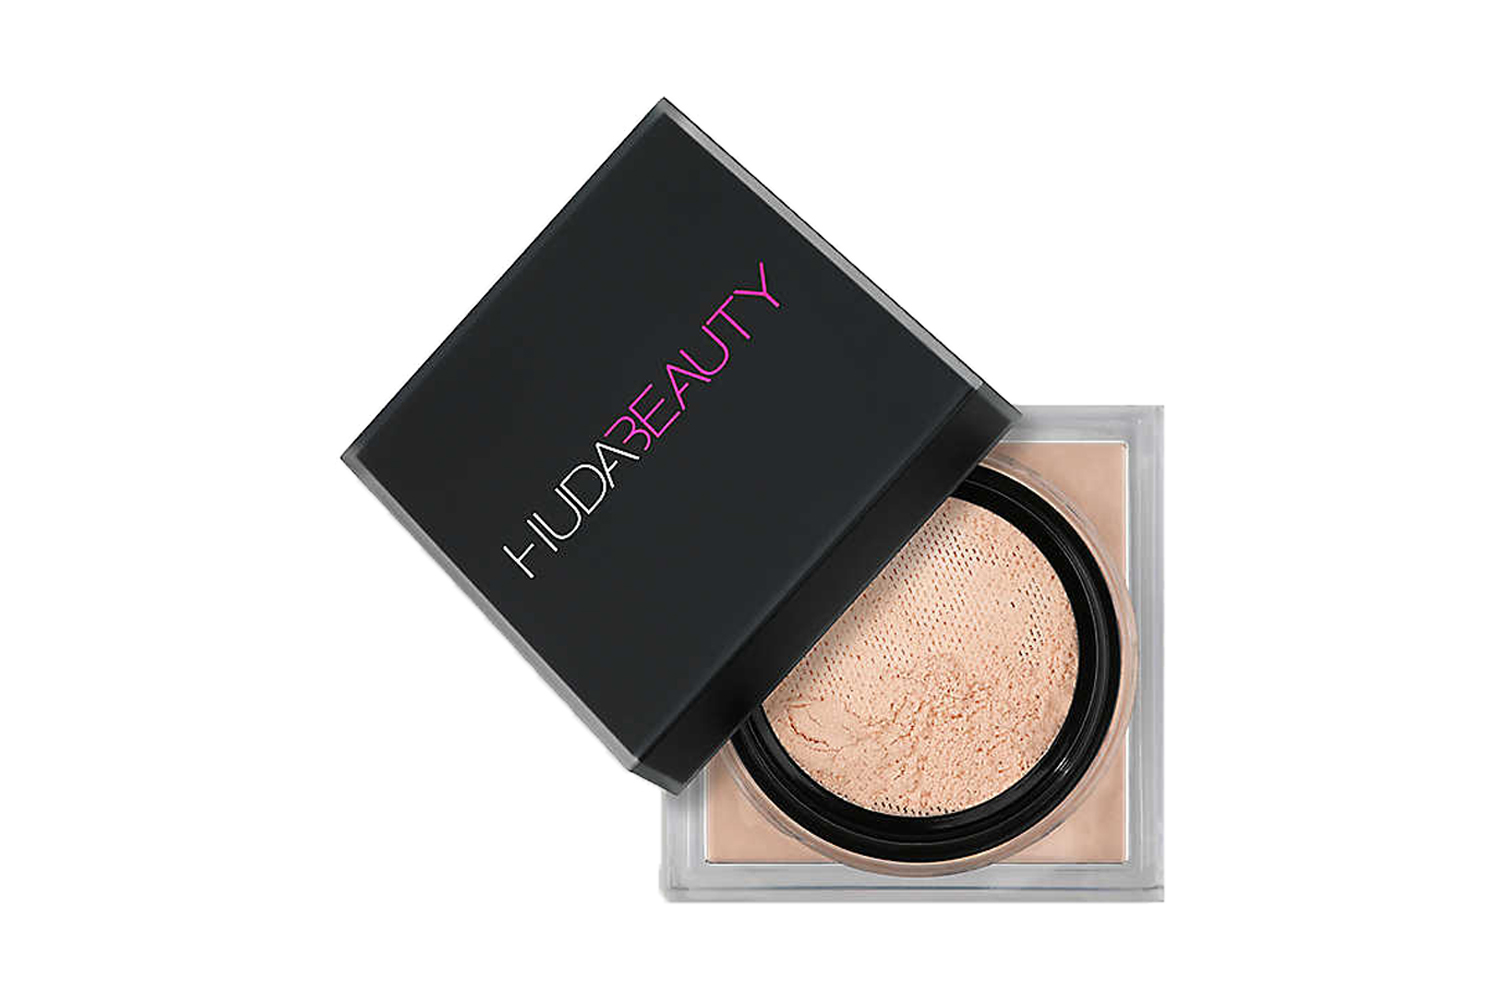 The 5 Best Setting Powders To Purchase This 2020